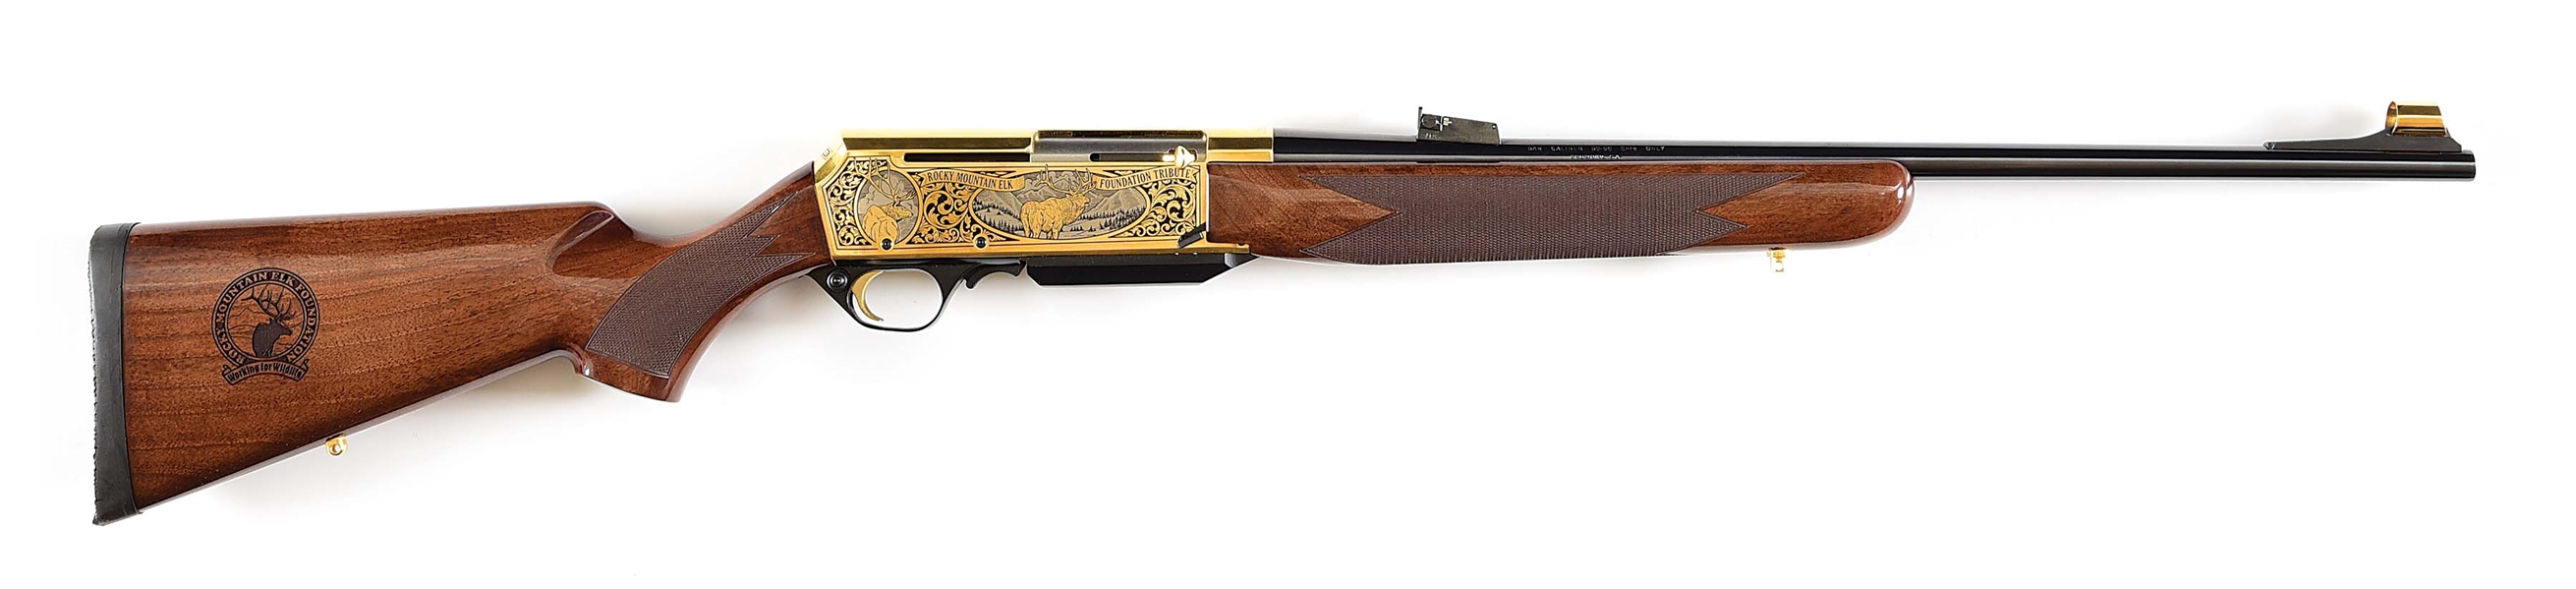 (M) 1 OF 300 GOLD PLATED AND ENGRAVED BROWNING ROCKY MOUNTAIN ELK FOUNDATION TRIBUTE BAR MARK II SEMI-AUTOMATIC RIFLE.